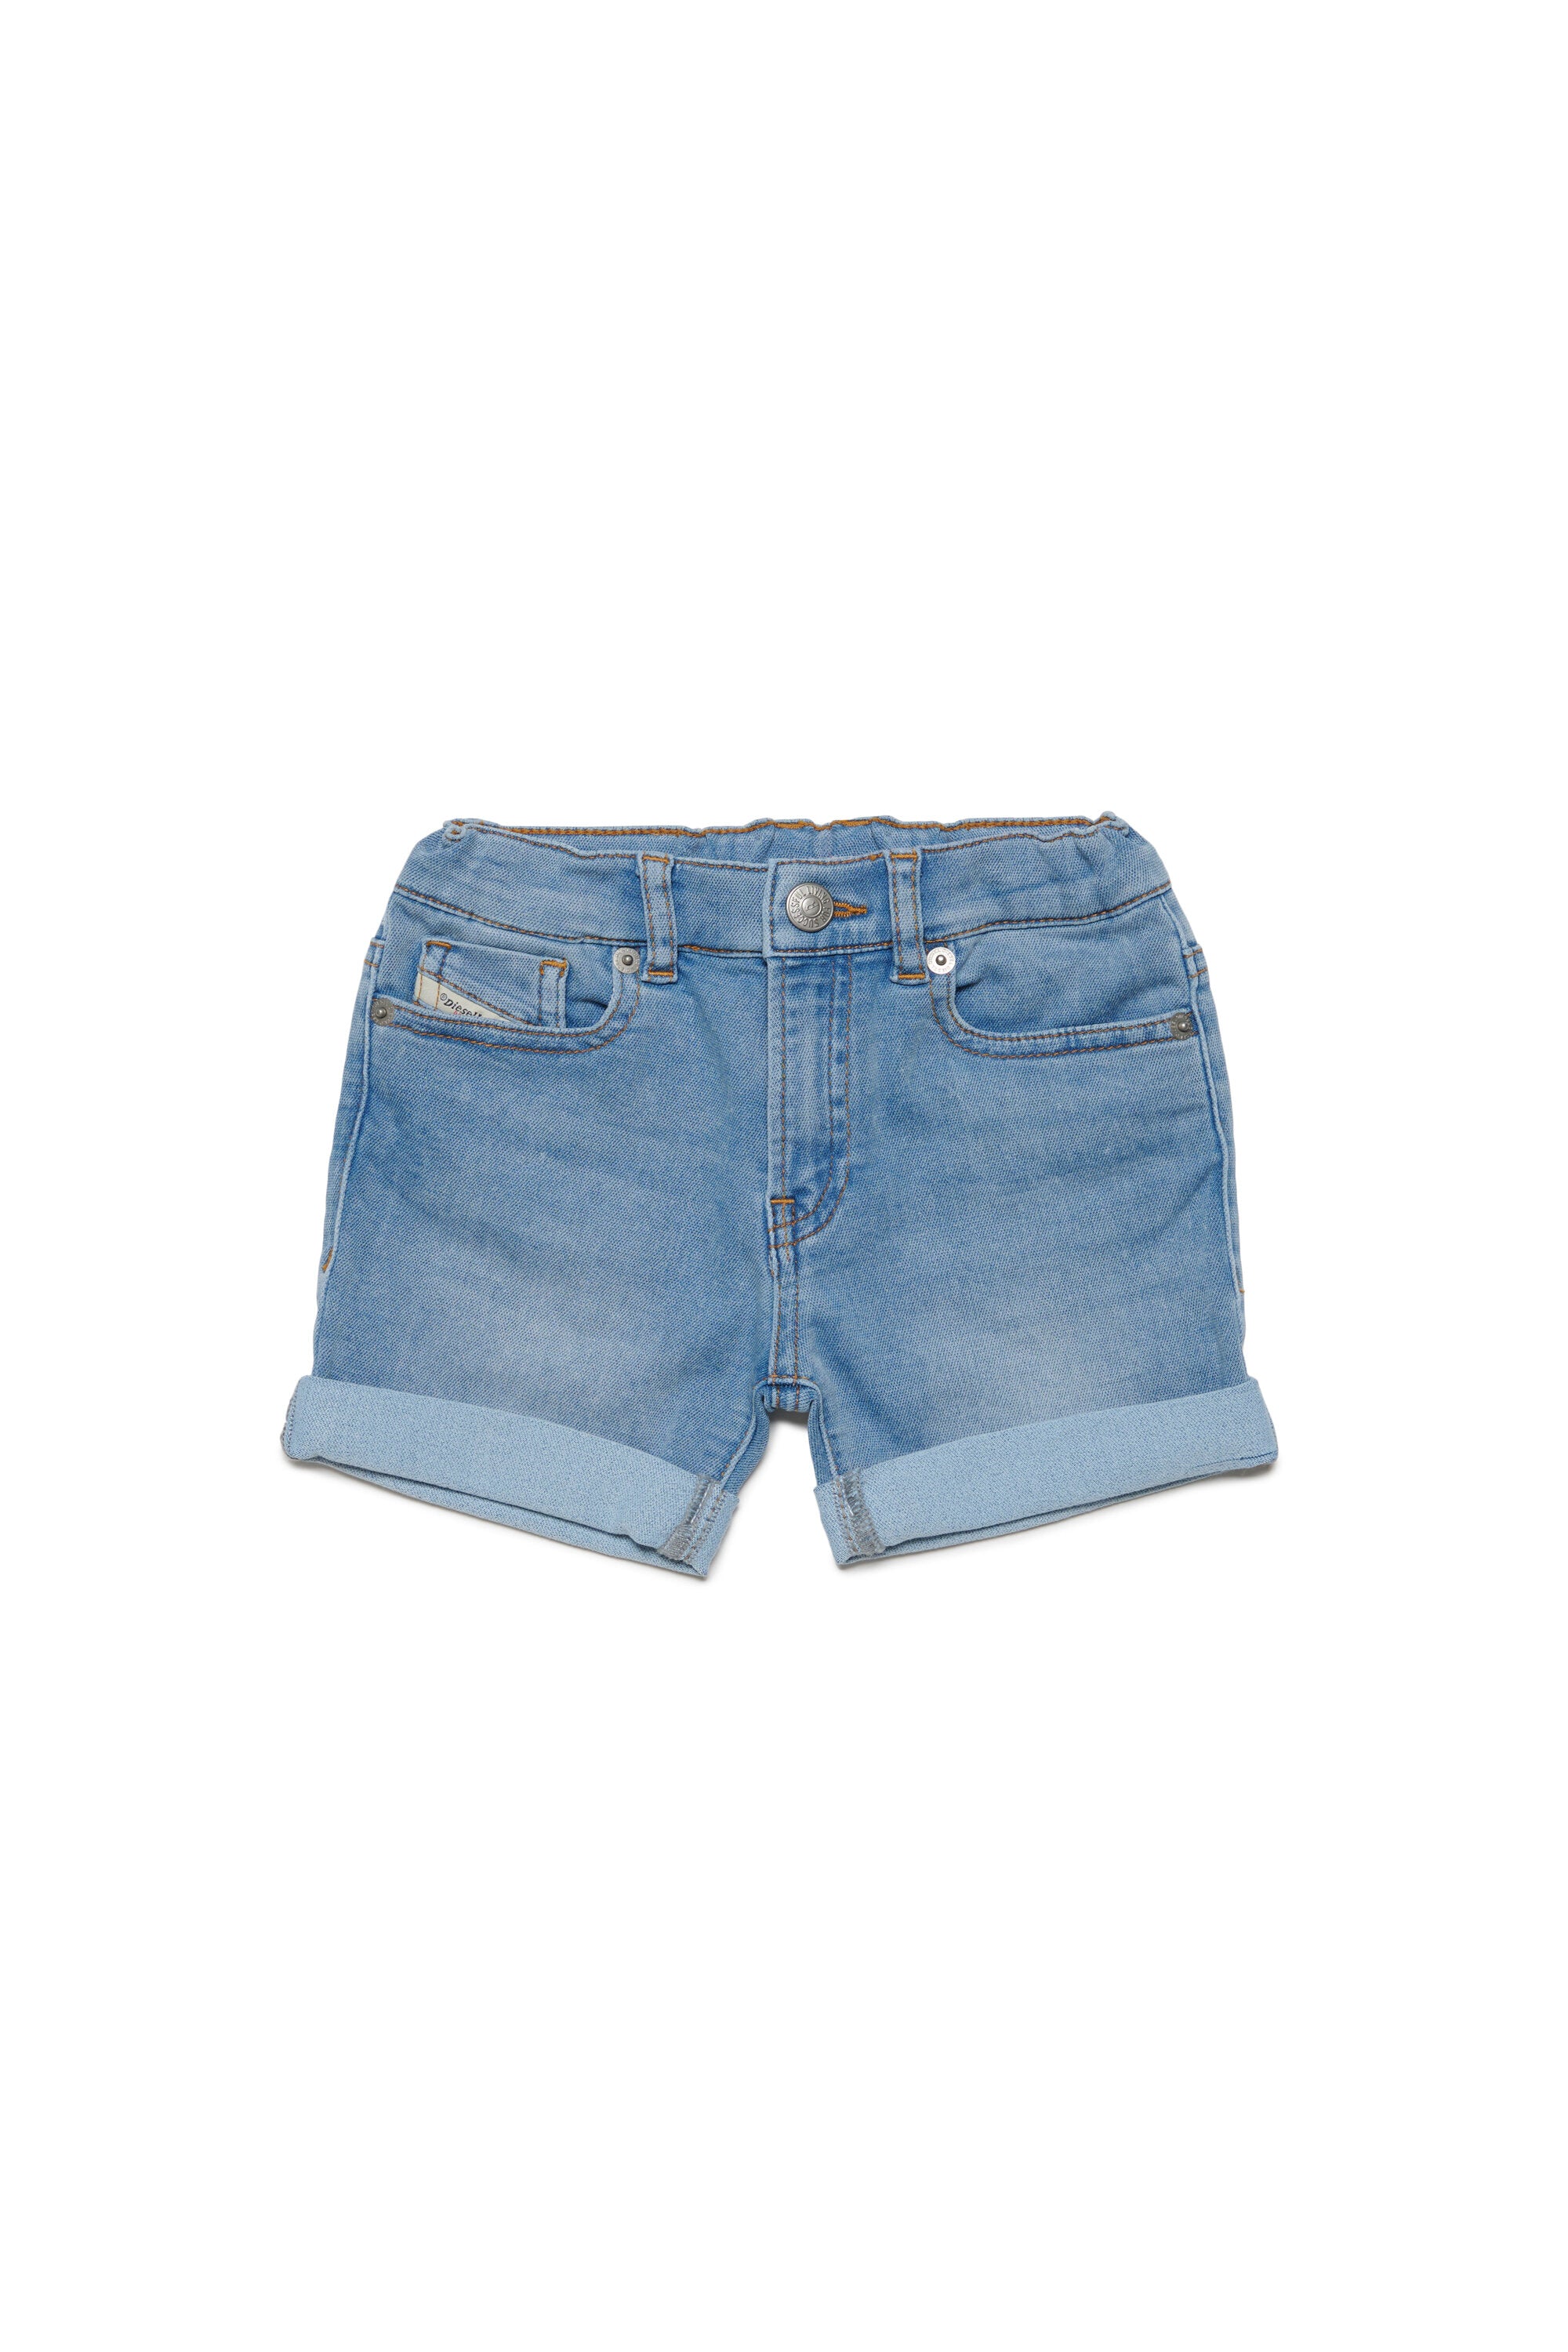 JoggJeans® shorts with roll-ups